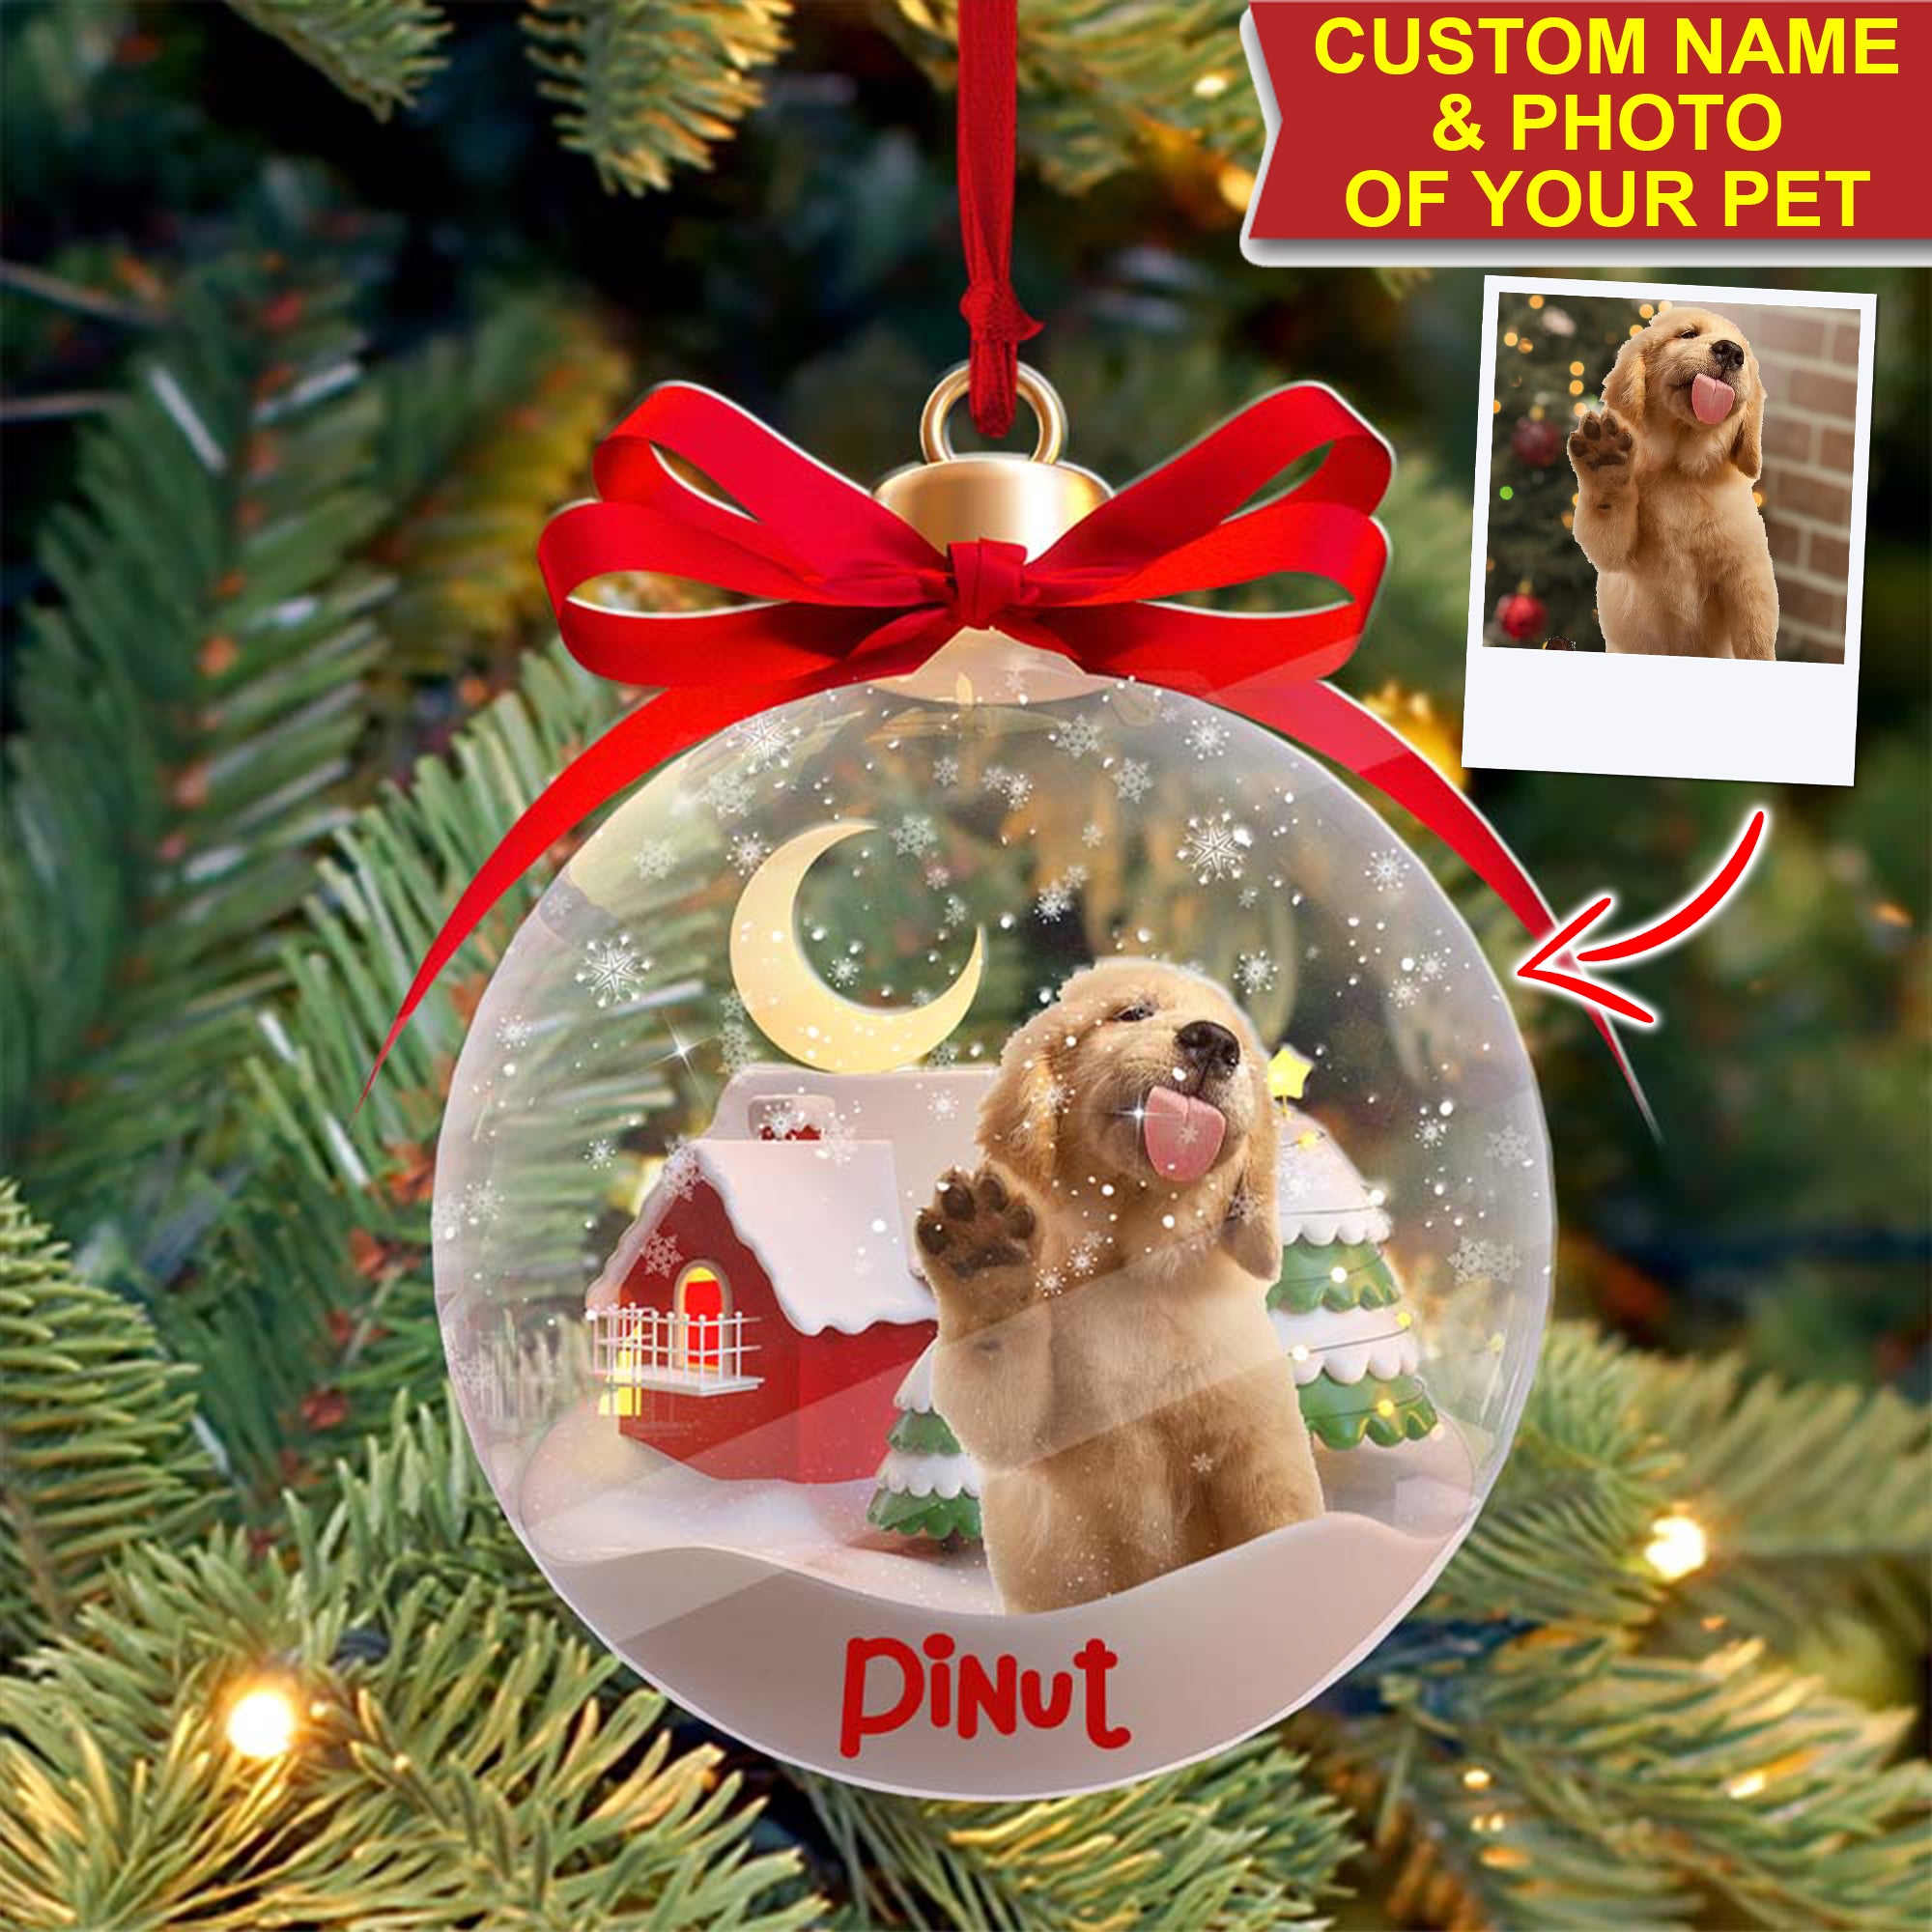 Christmas Pet In Ball - Custom Photo And Name, Personalized Acrylic Ornament - Gift For Christmas, Gift For Pet Lover